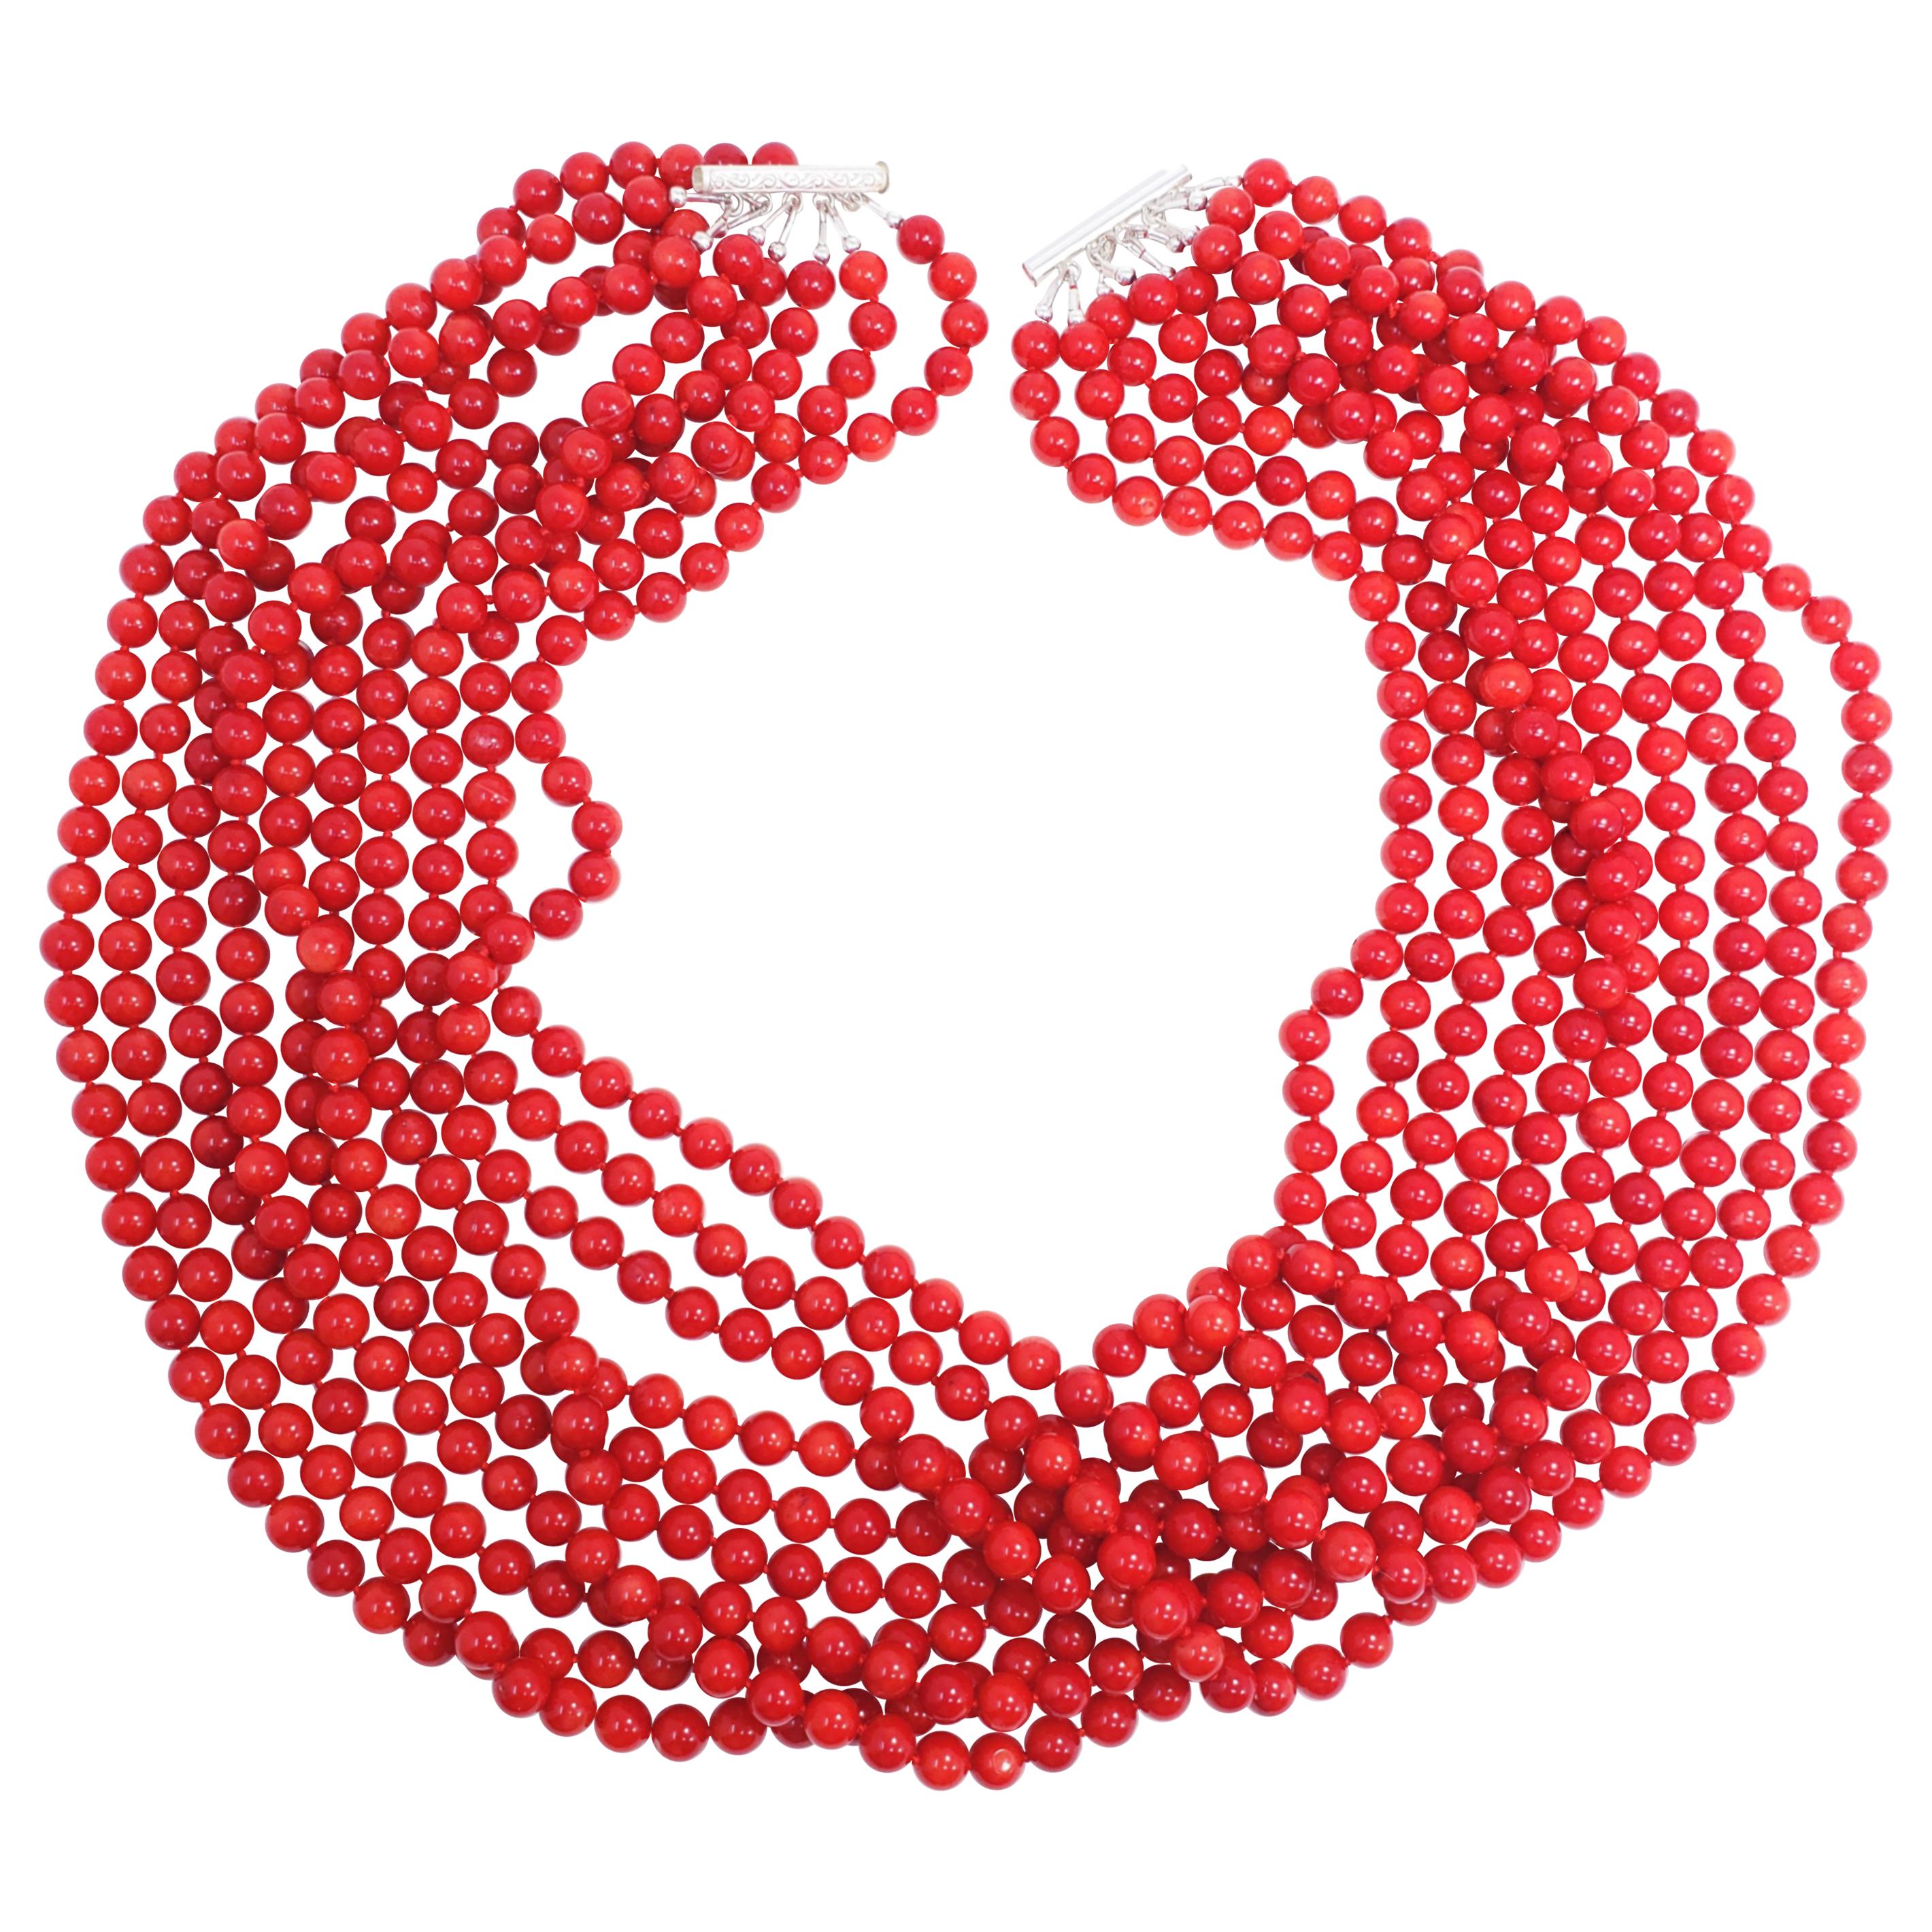 10 Strand Genuine Red Coral 7mm Bead Necklace with Sterling Silver Sliding Clasp